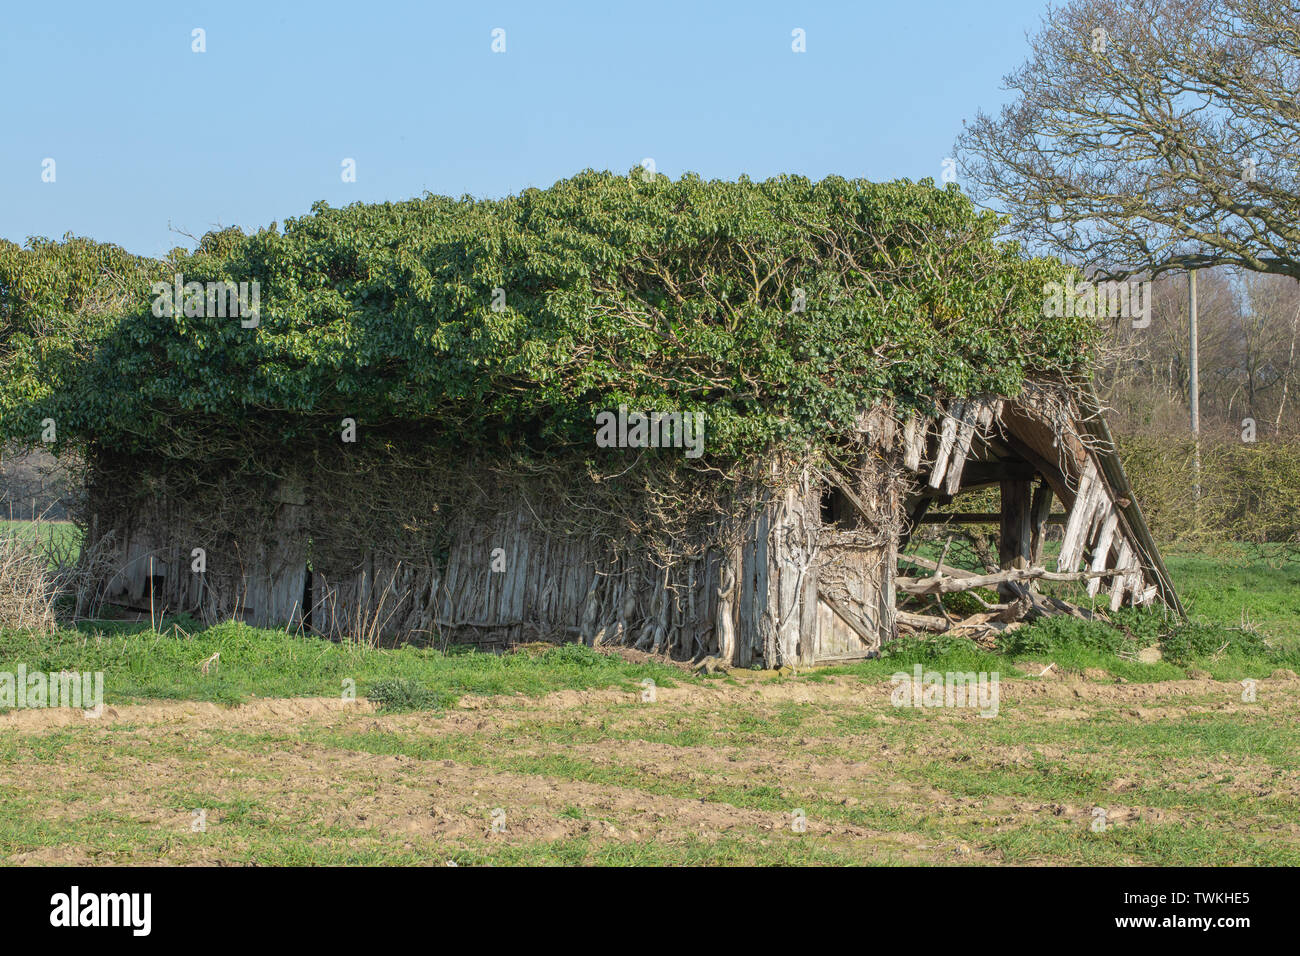 Asbestos roofed, former cattle field shed and shelter. Redundant. Wild Red Deer (Cervus elaphus), pruned Ivy (Hedera helix), still supporting left side wall from collapsing. Otherwise timber support structure about to fall. Rural Norfolk. UK Stock Photo